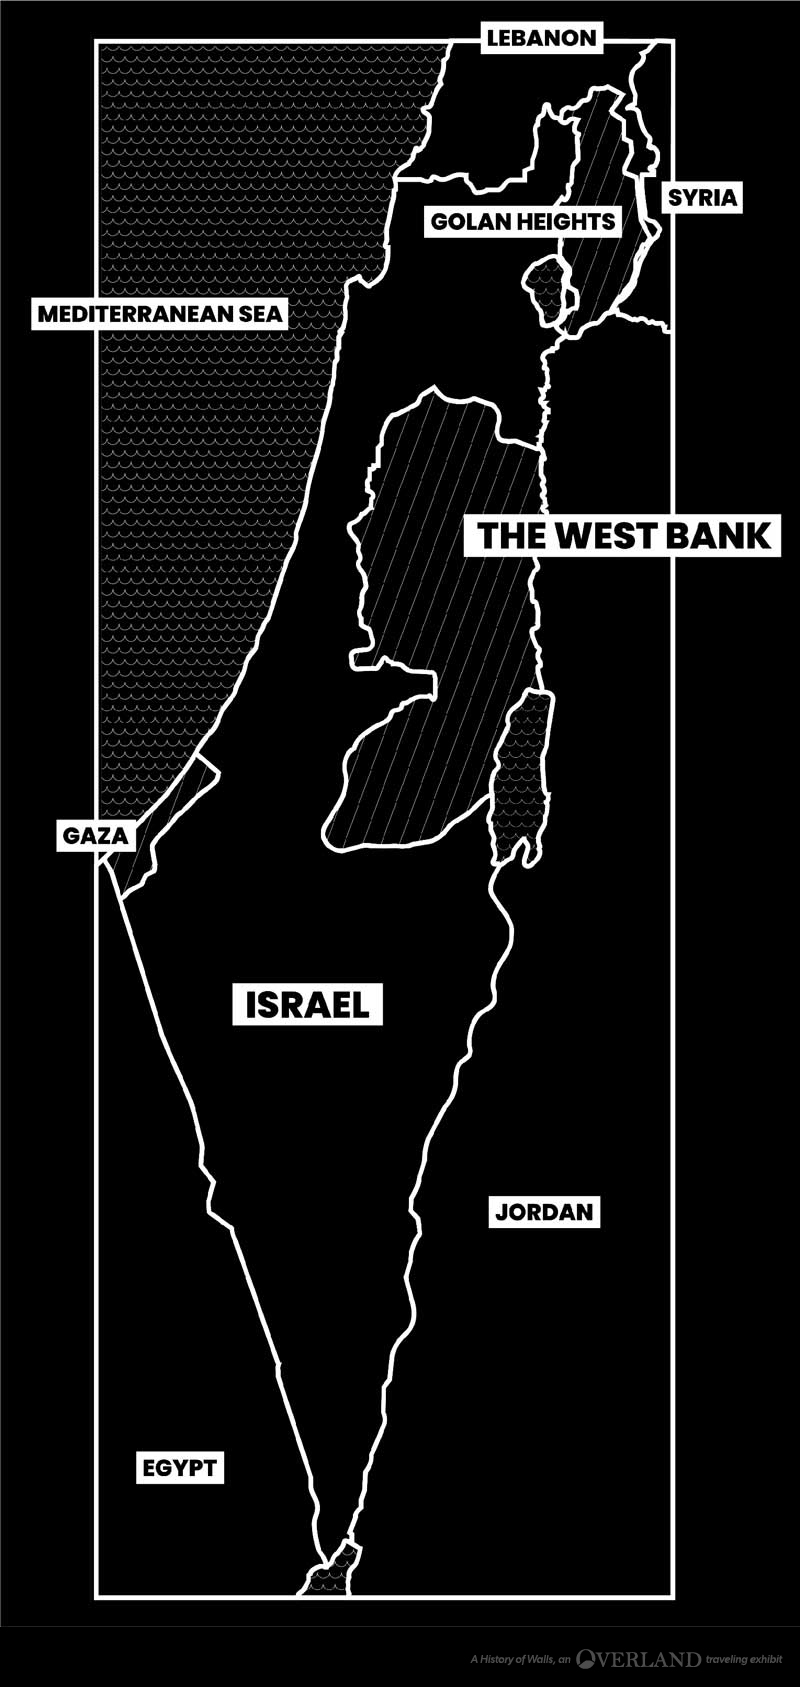 A simple black and white map showing the West Bank in relation to Israel and surrounding countries.